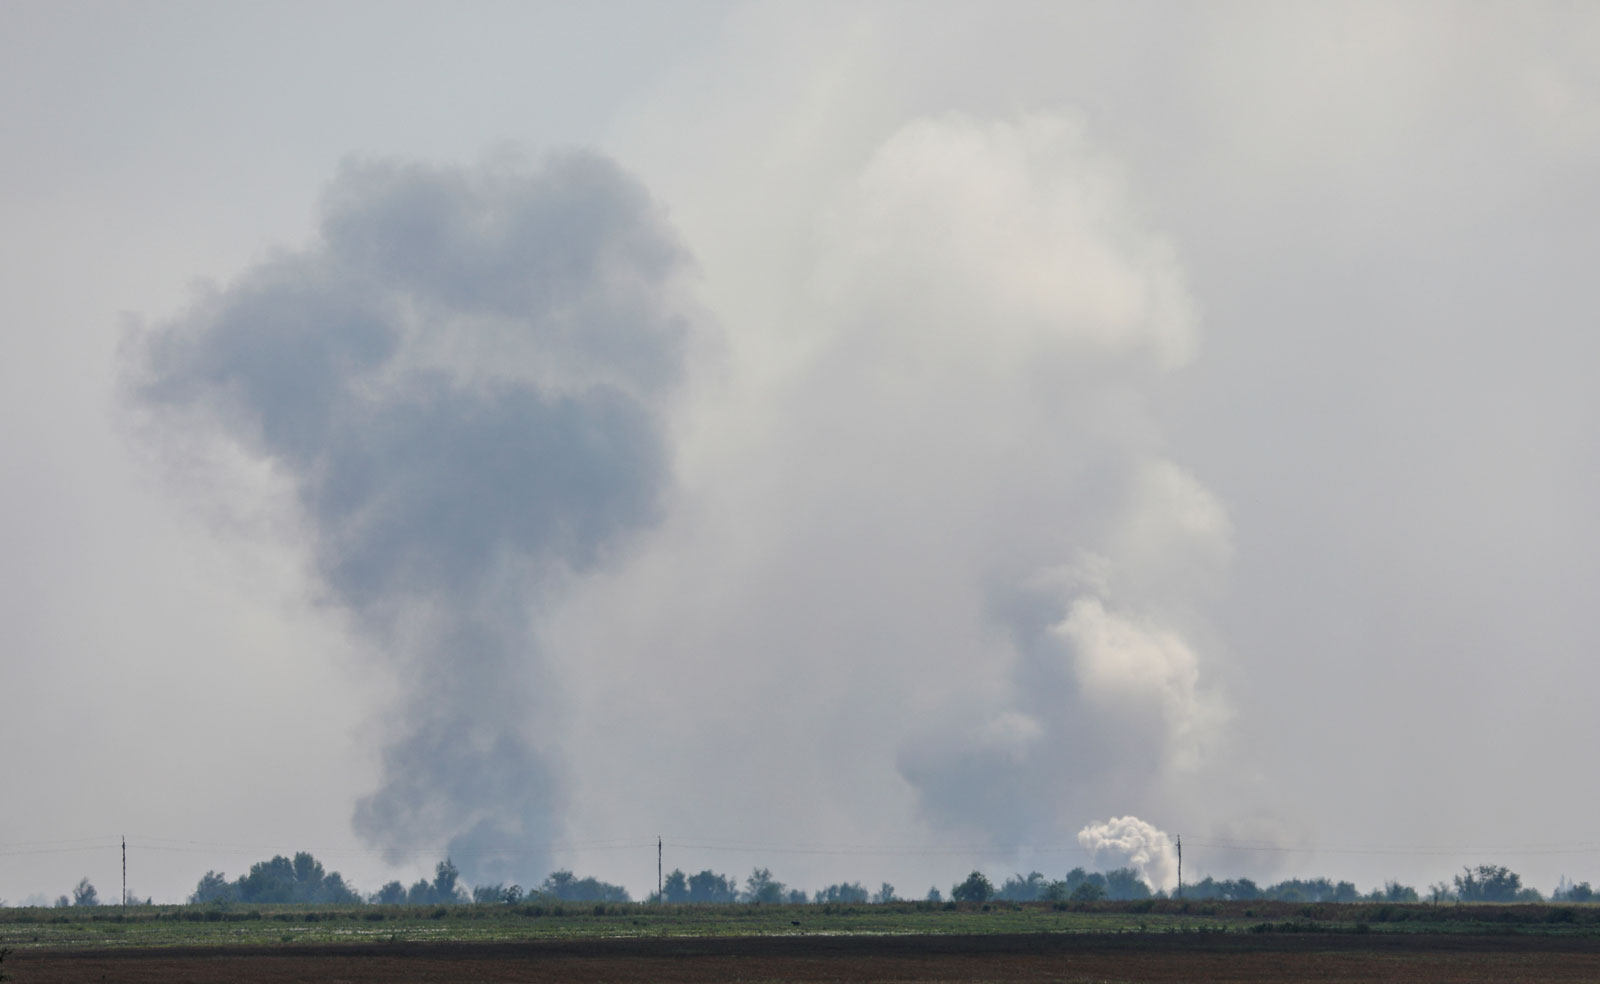 Smoke rises following an explosion in the village of Mayskoye in the Dzhankoi district, Crimea on Tuesday.